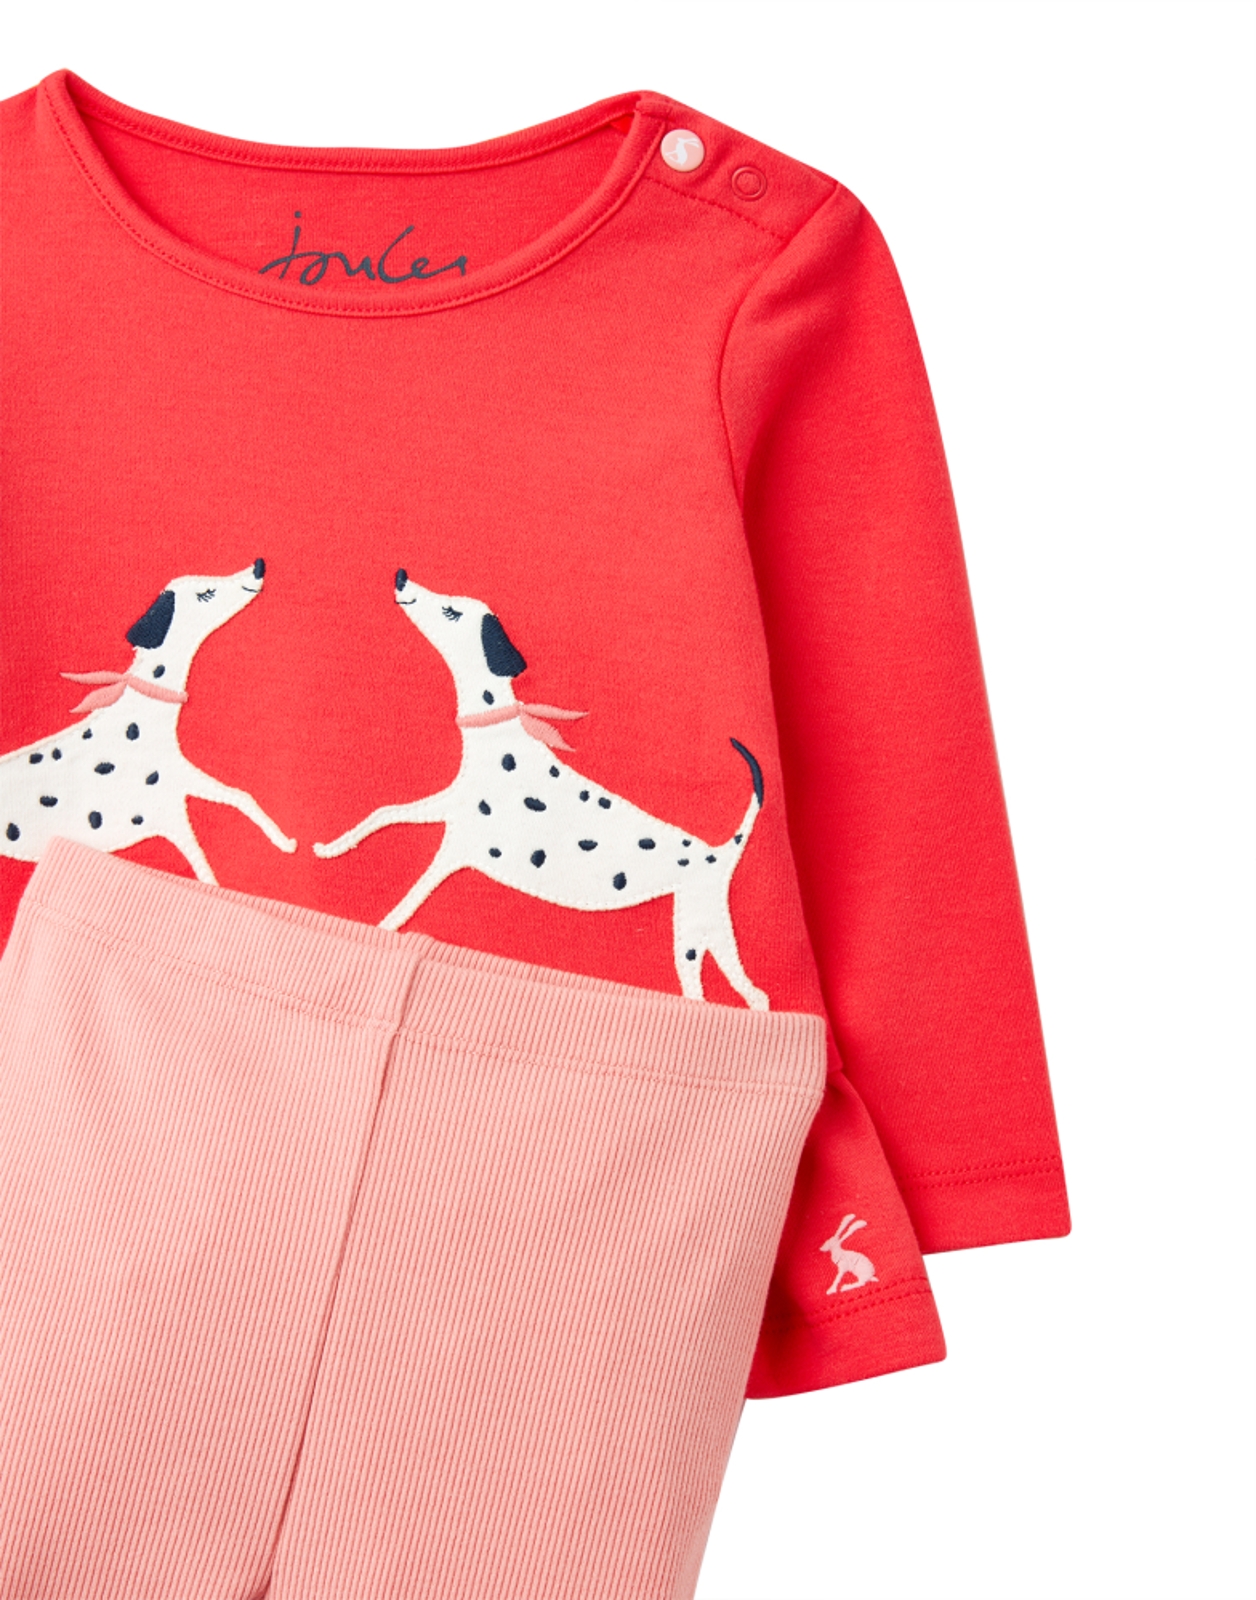 Red Dalmatians Joules Baby Girls Olivia Applique Top And Legging Set 